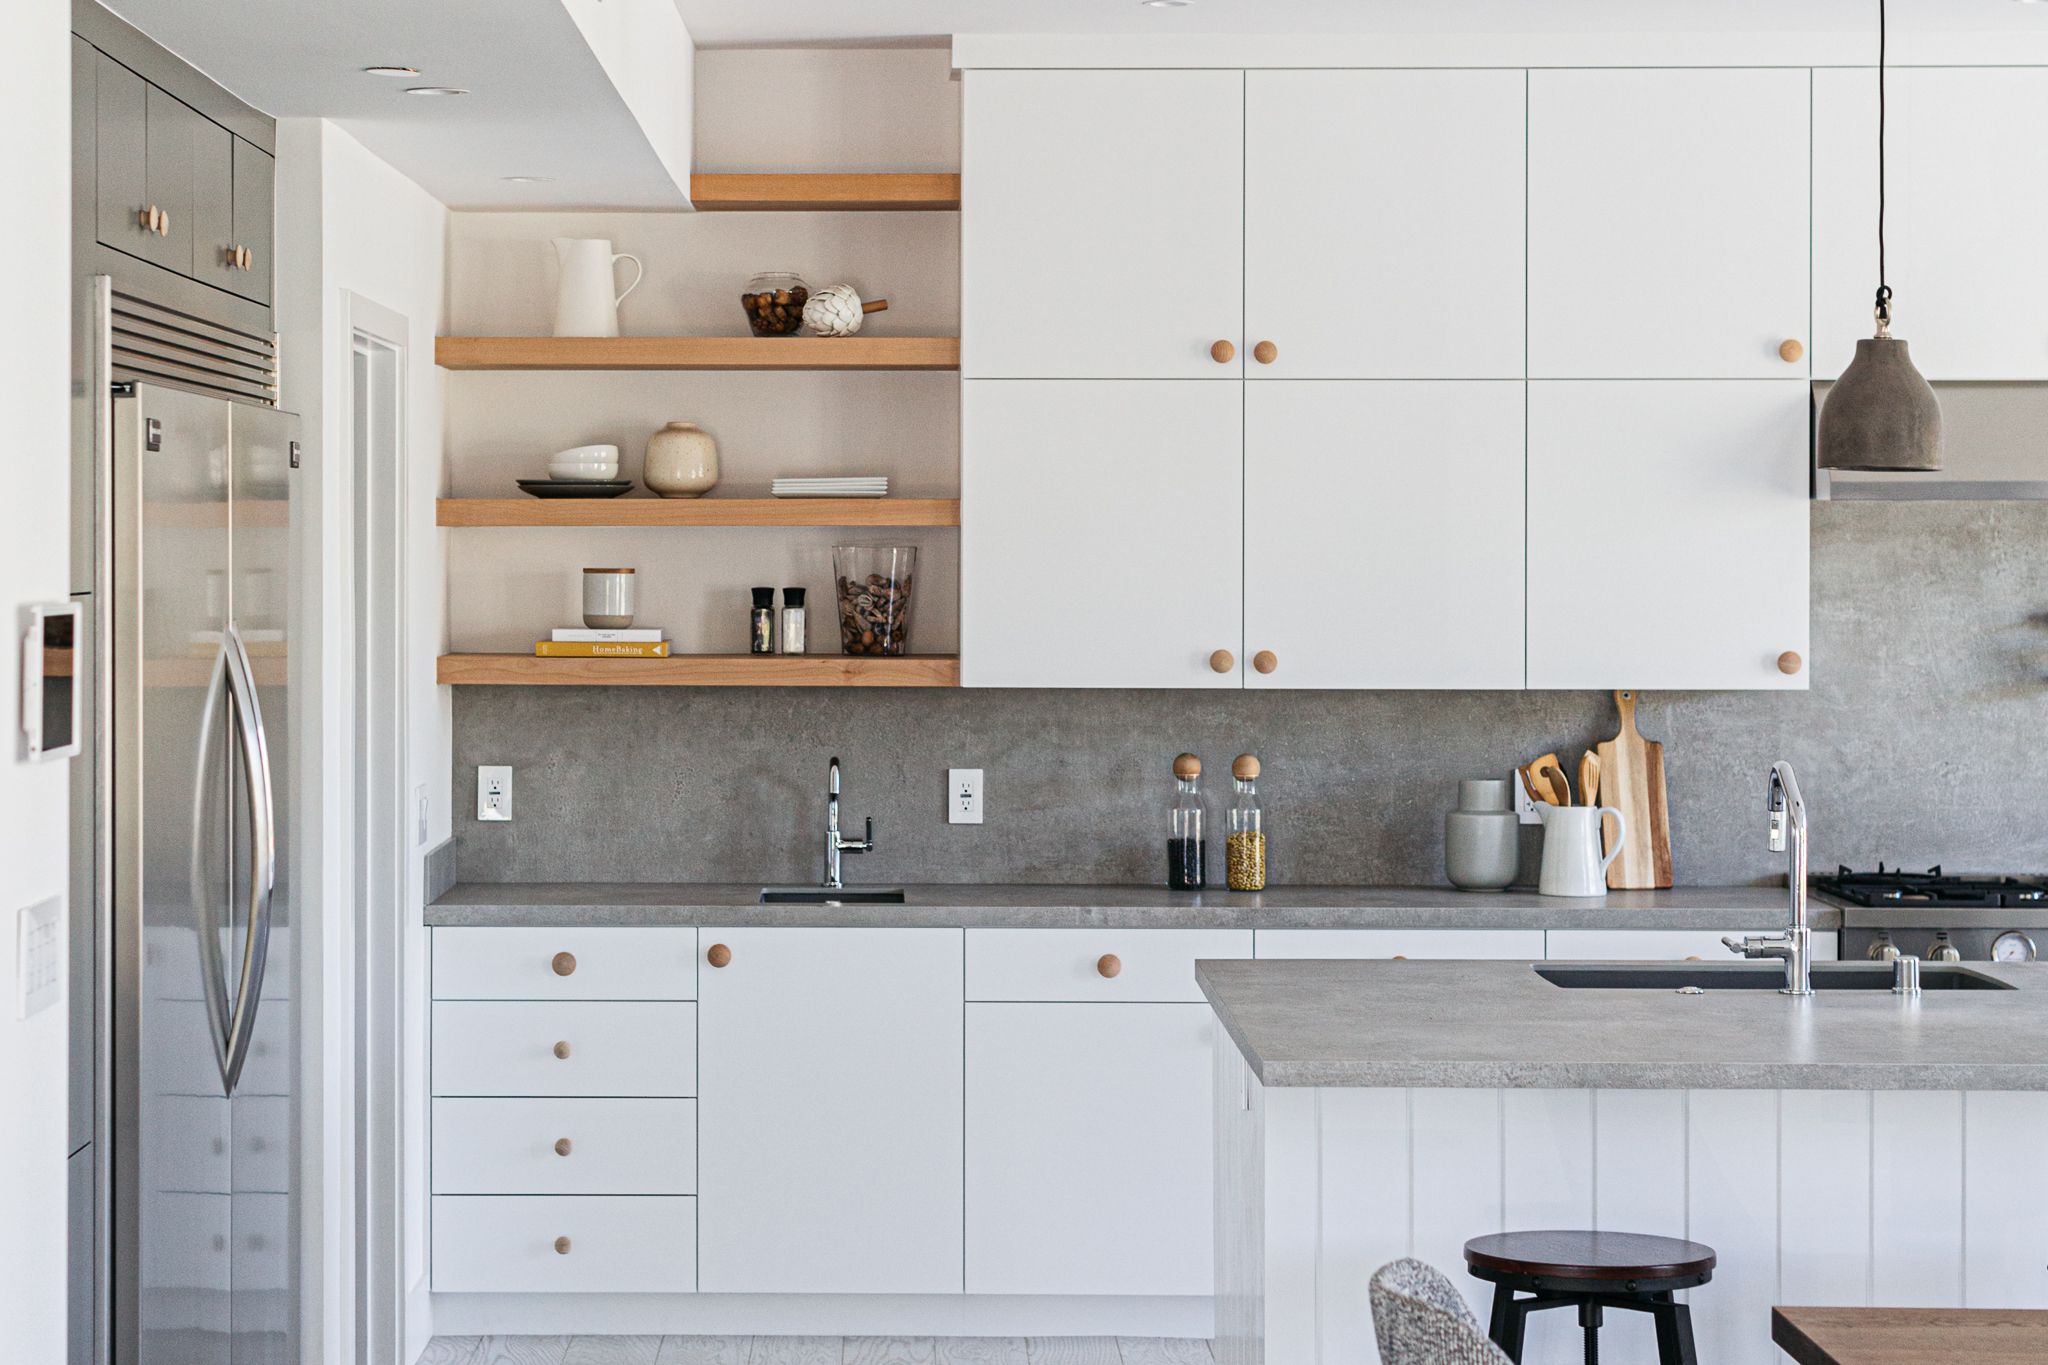 11 Kitchen Design Trends We re Loving This Year